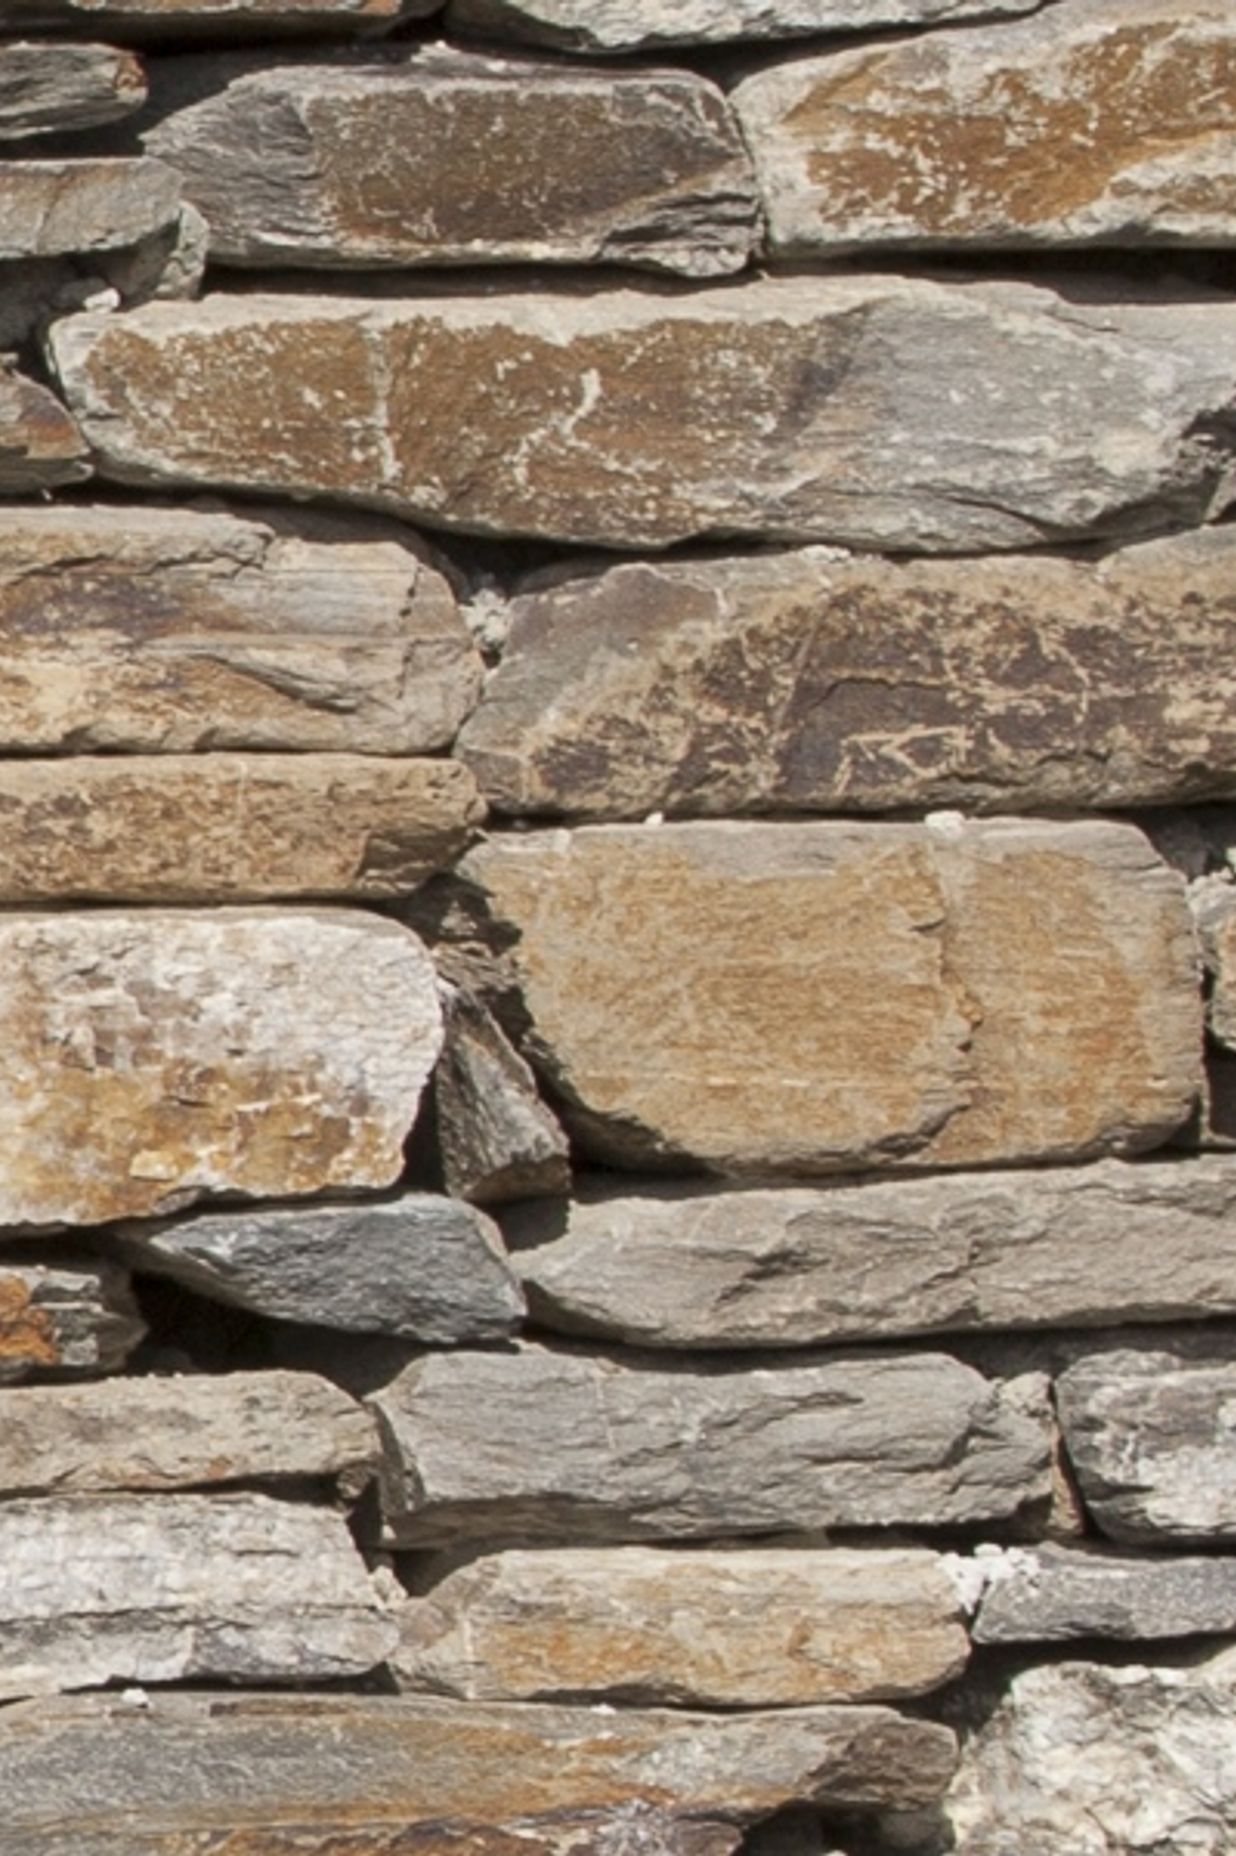 Cluden Naturals: We collect stone straight from the quarry with no guillotine used. The faces are rustic, more irregular and mostly brown with flashes of gold, grey and warm cream colours.